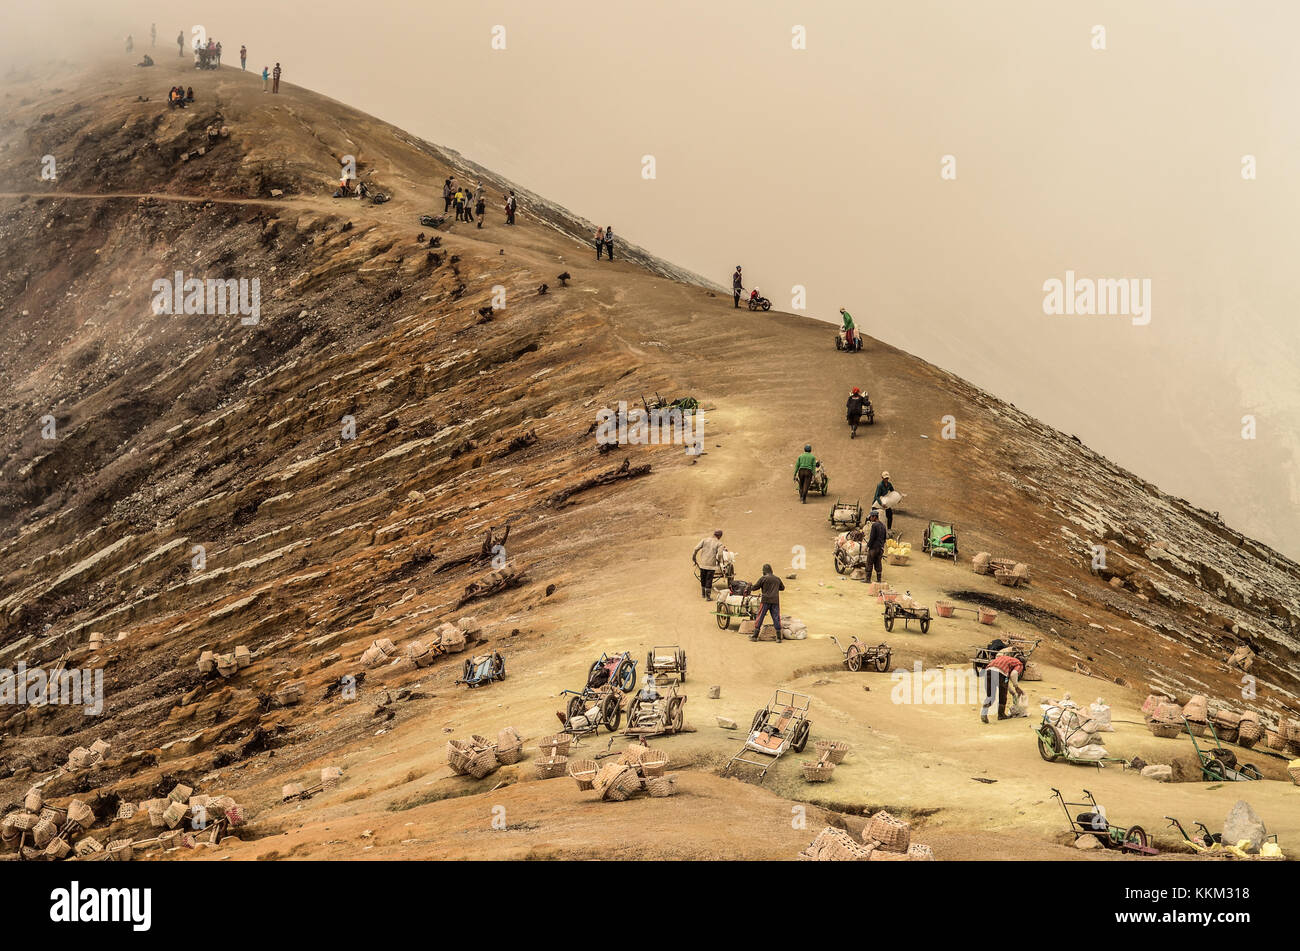 The sulfur mine in Kawah Ijen near Banyuwangi, East Java - Indonesia. The miner use wheel cart to transport the sulfur from mountain top to bottom. Stock Photo